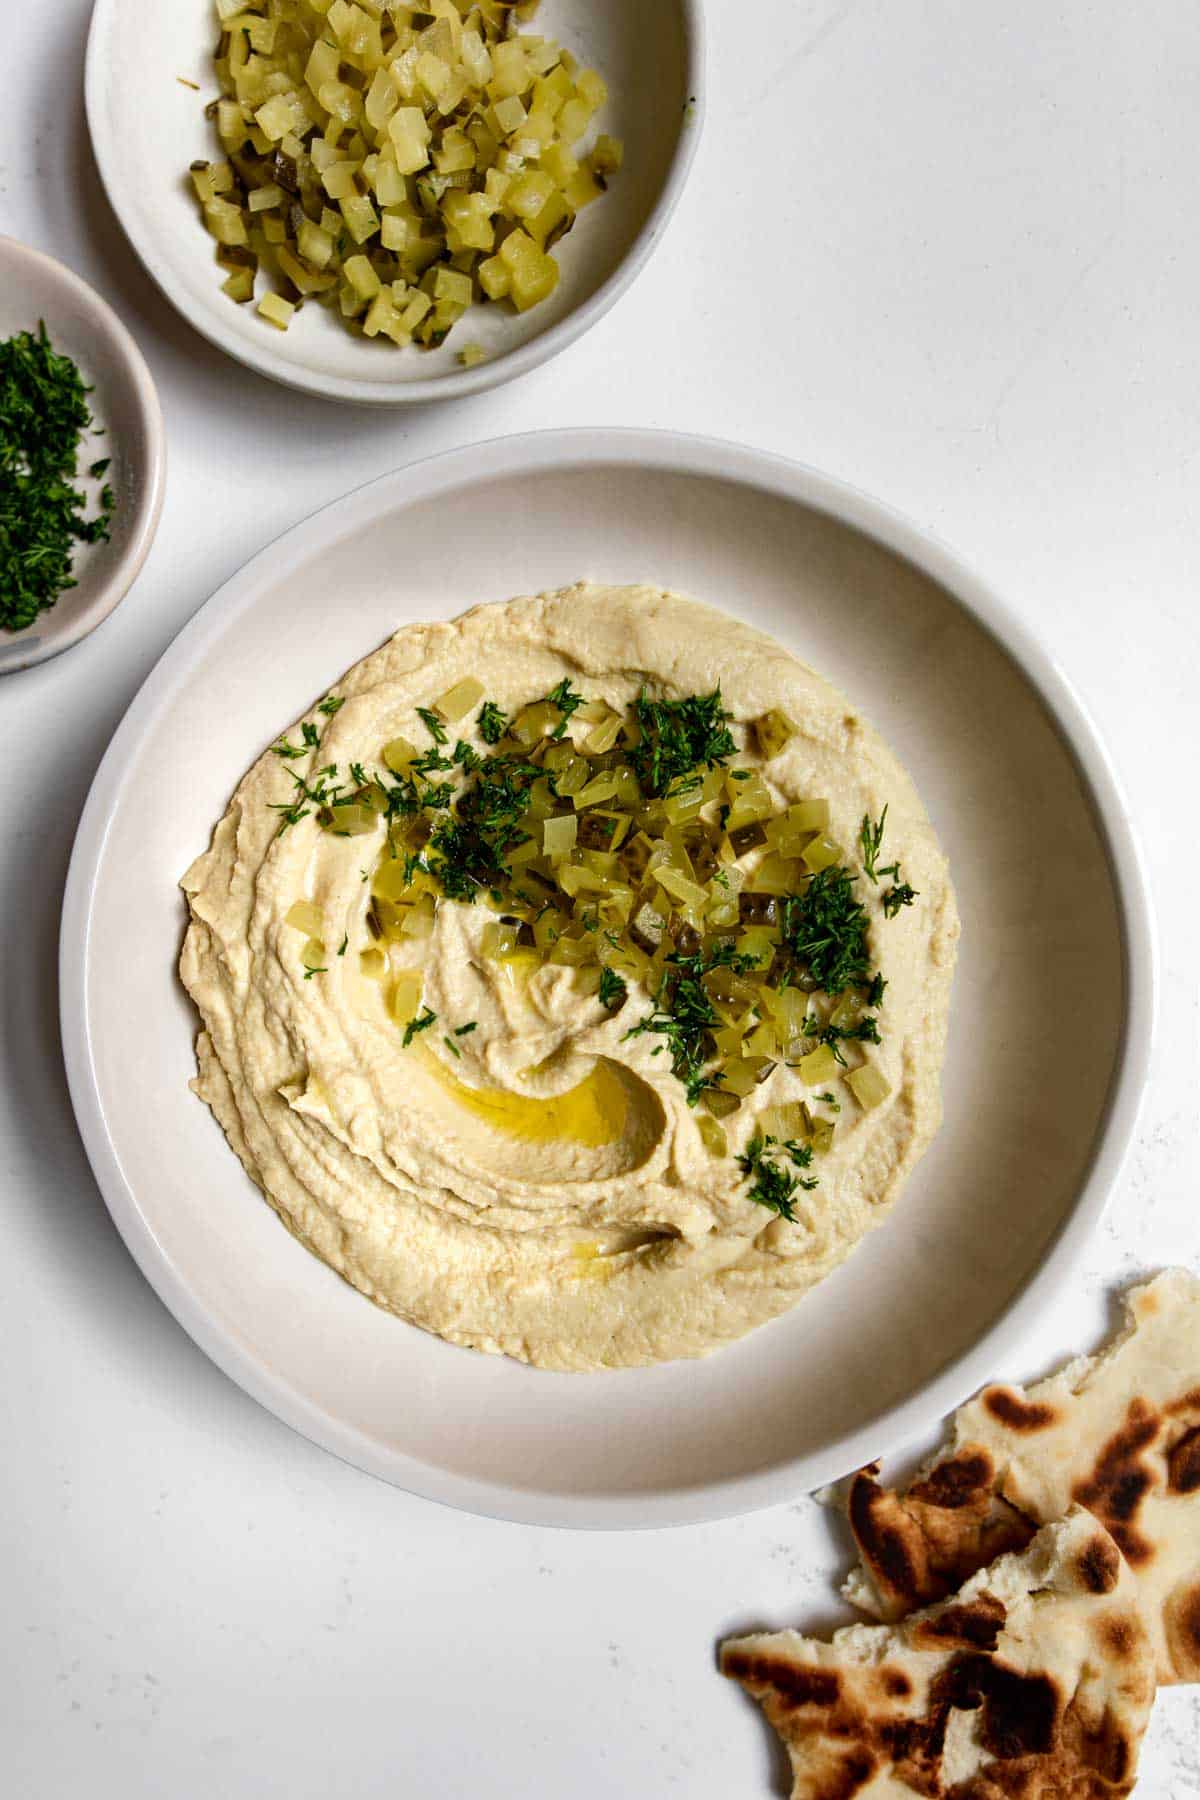 hummus topped with chopped dill pickle and dill sprigs with pita bread next to it.